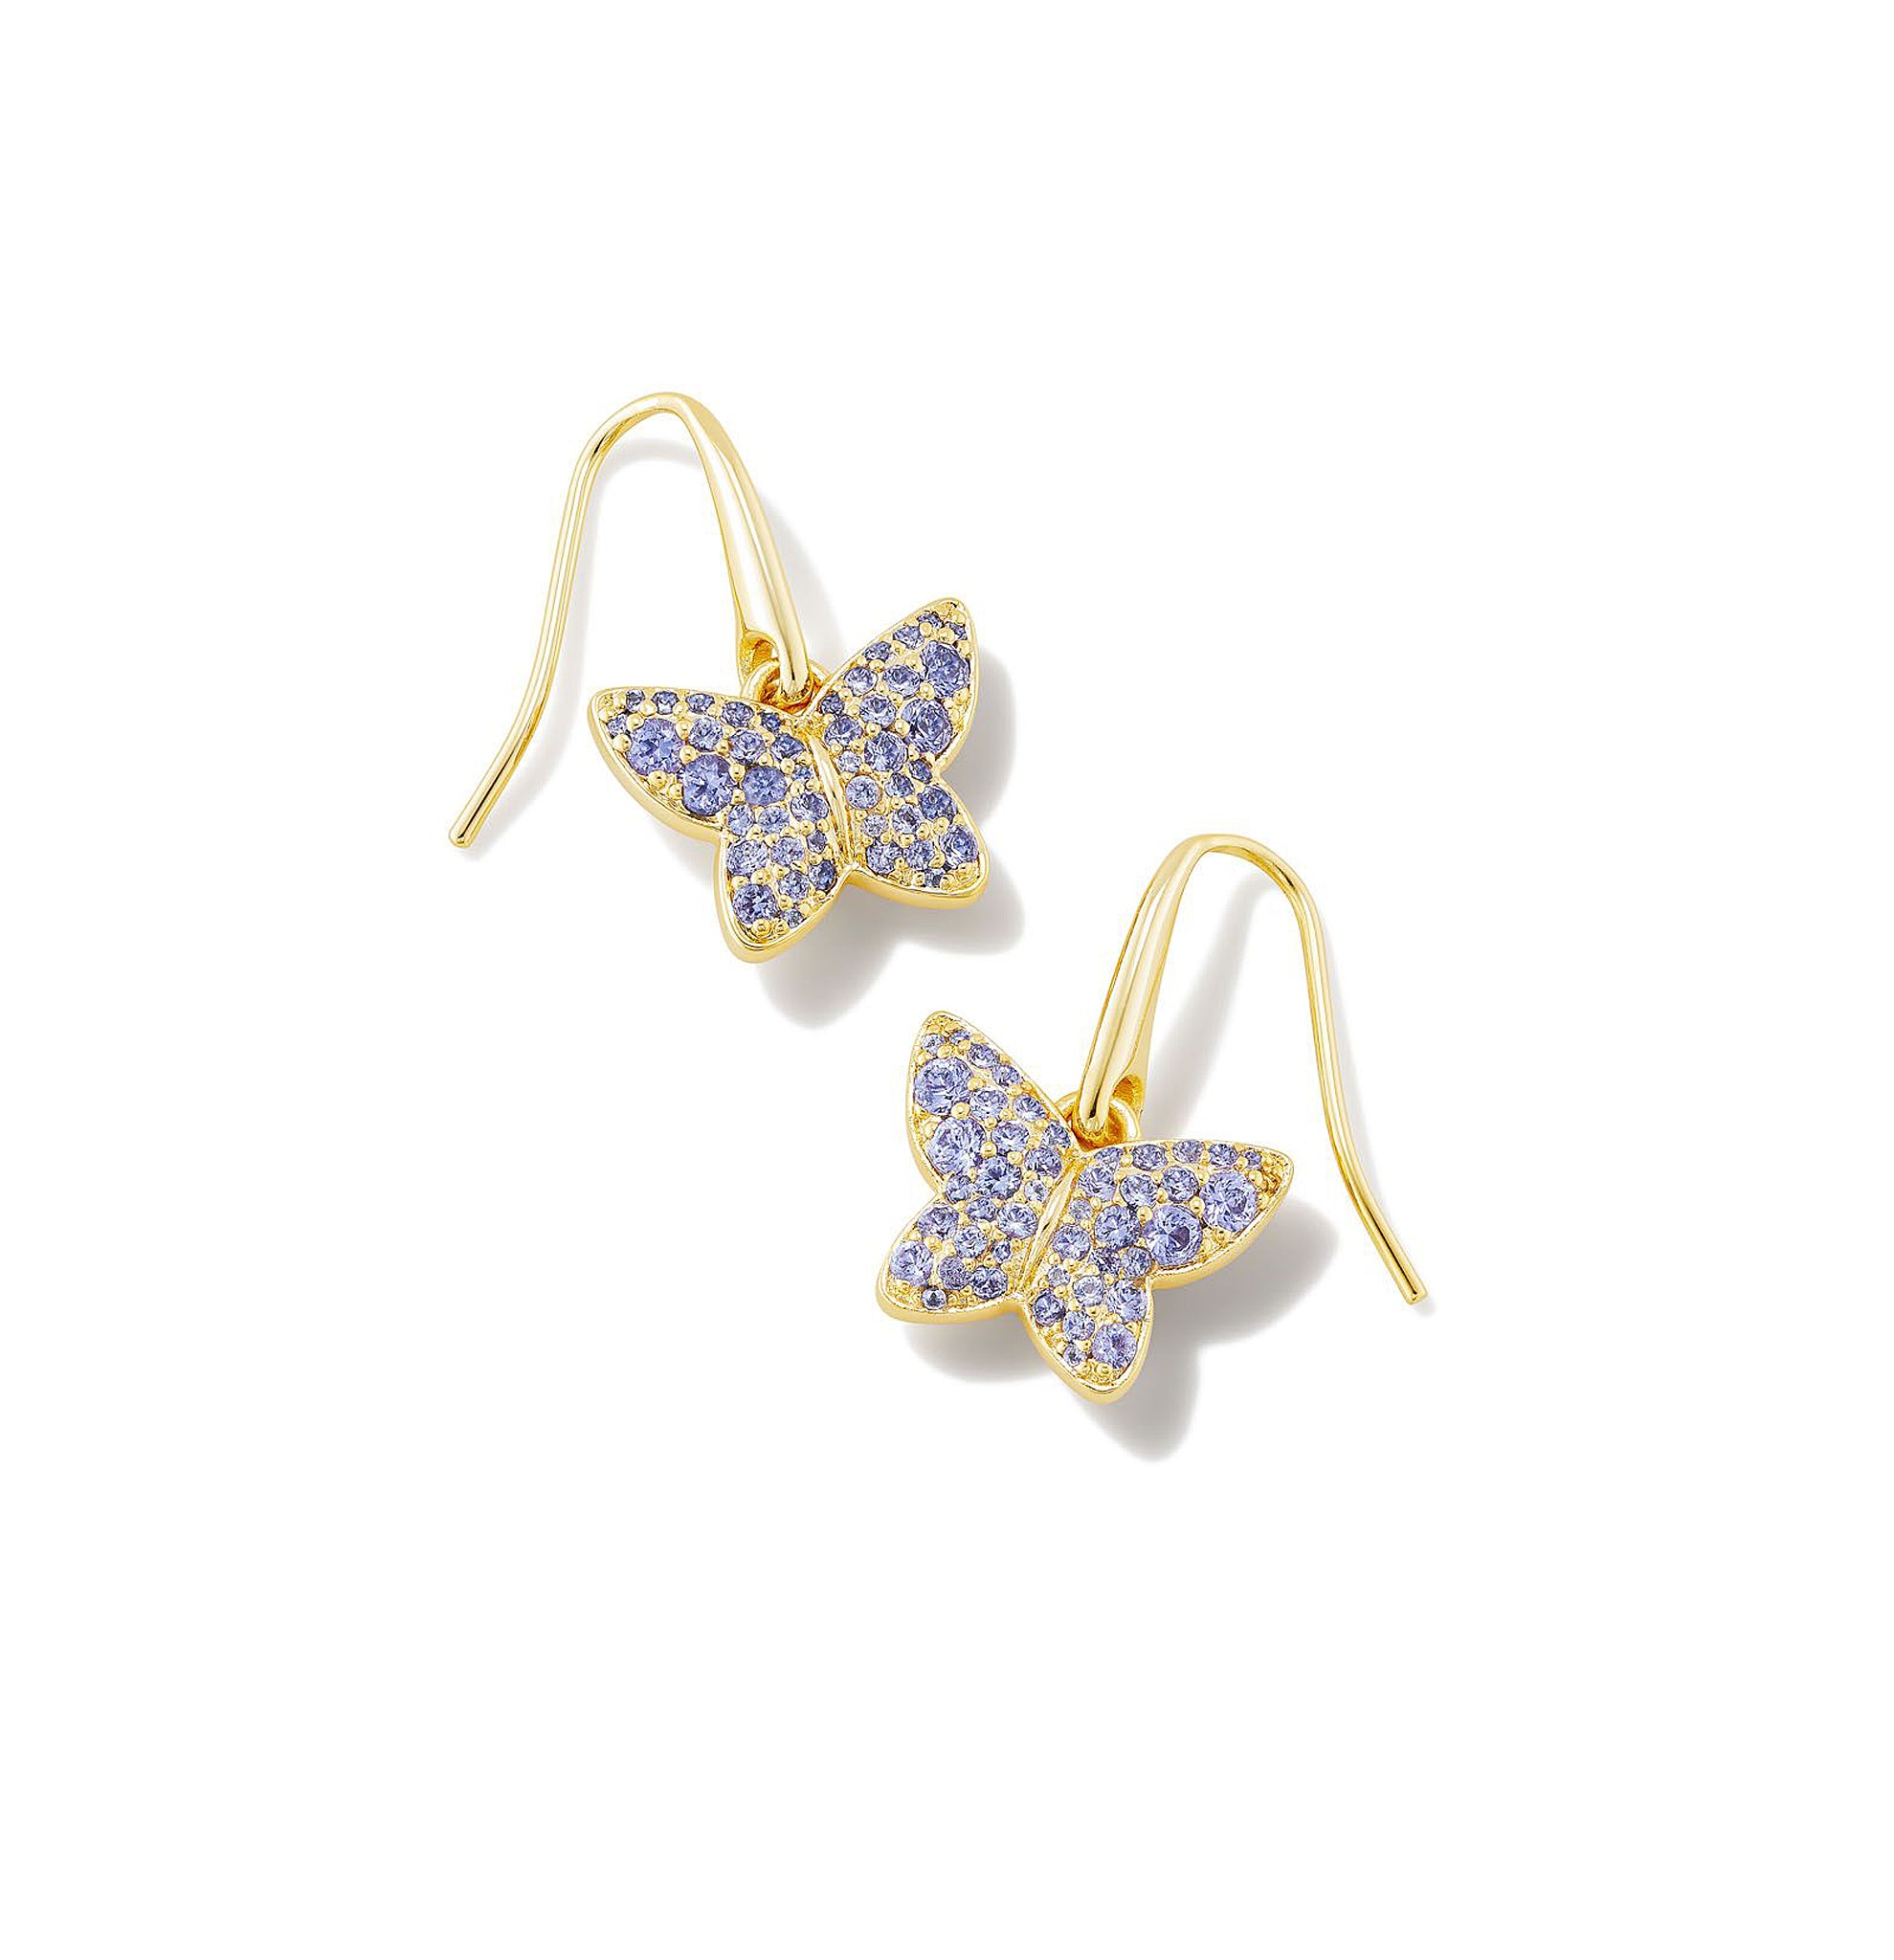 Kendra Scott Lillia Butterfly Dangle Earrings in Violet Crystal and Gold Plated